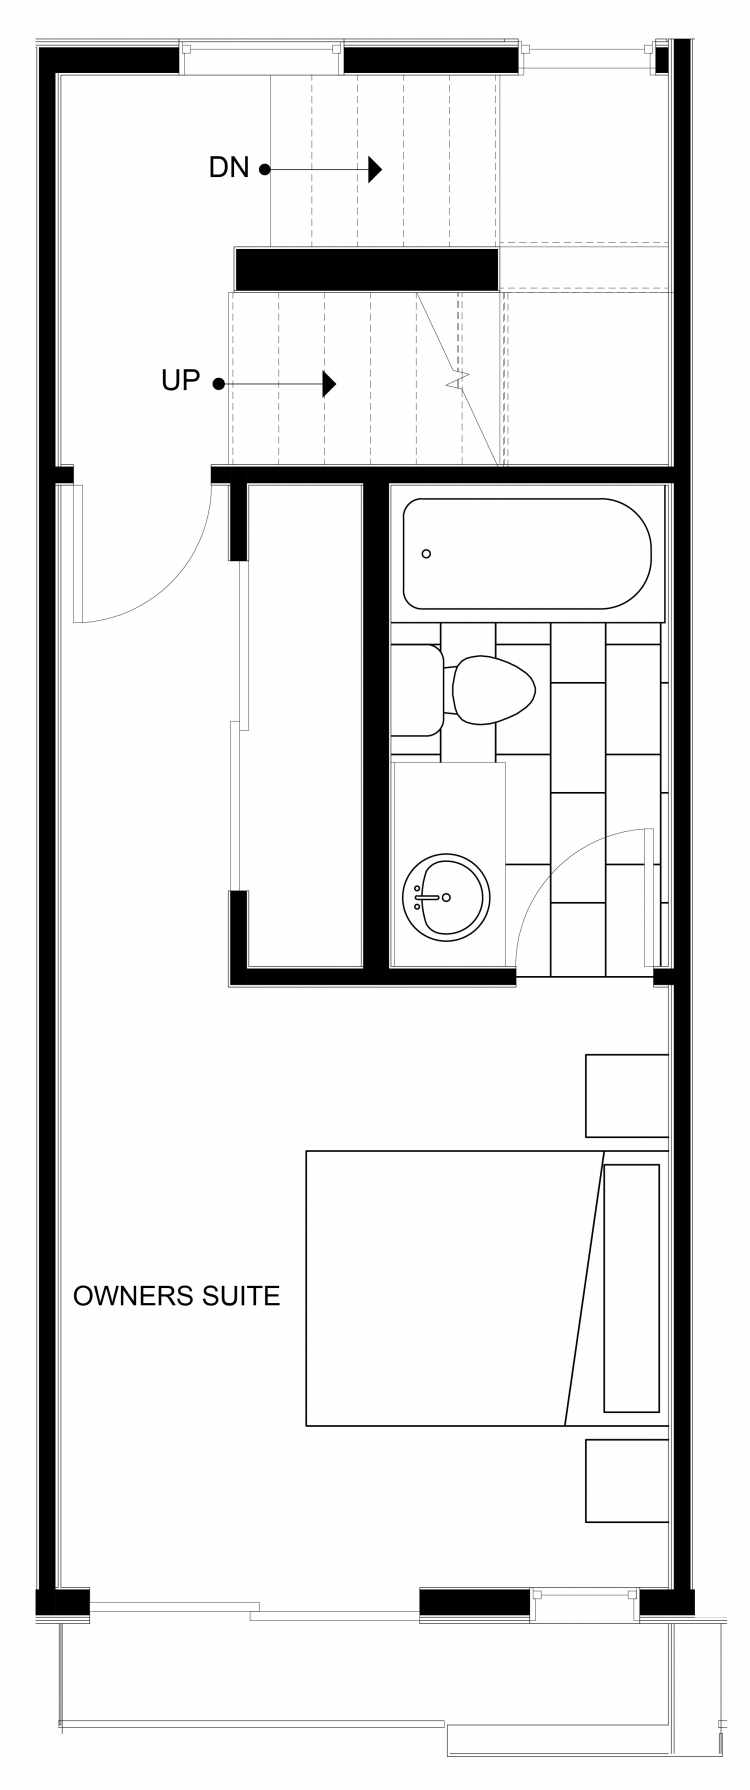 Fourth Floor Plan of 1540 15th Ave E, One of the Larrabee Townhomes in Capitol Hill